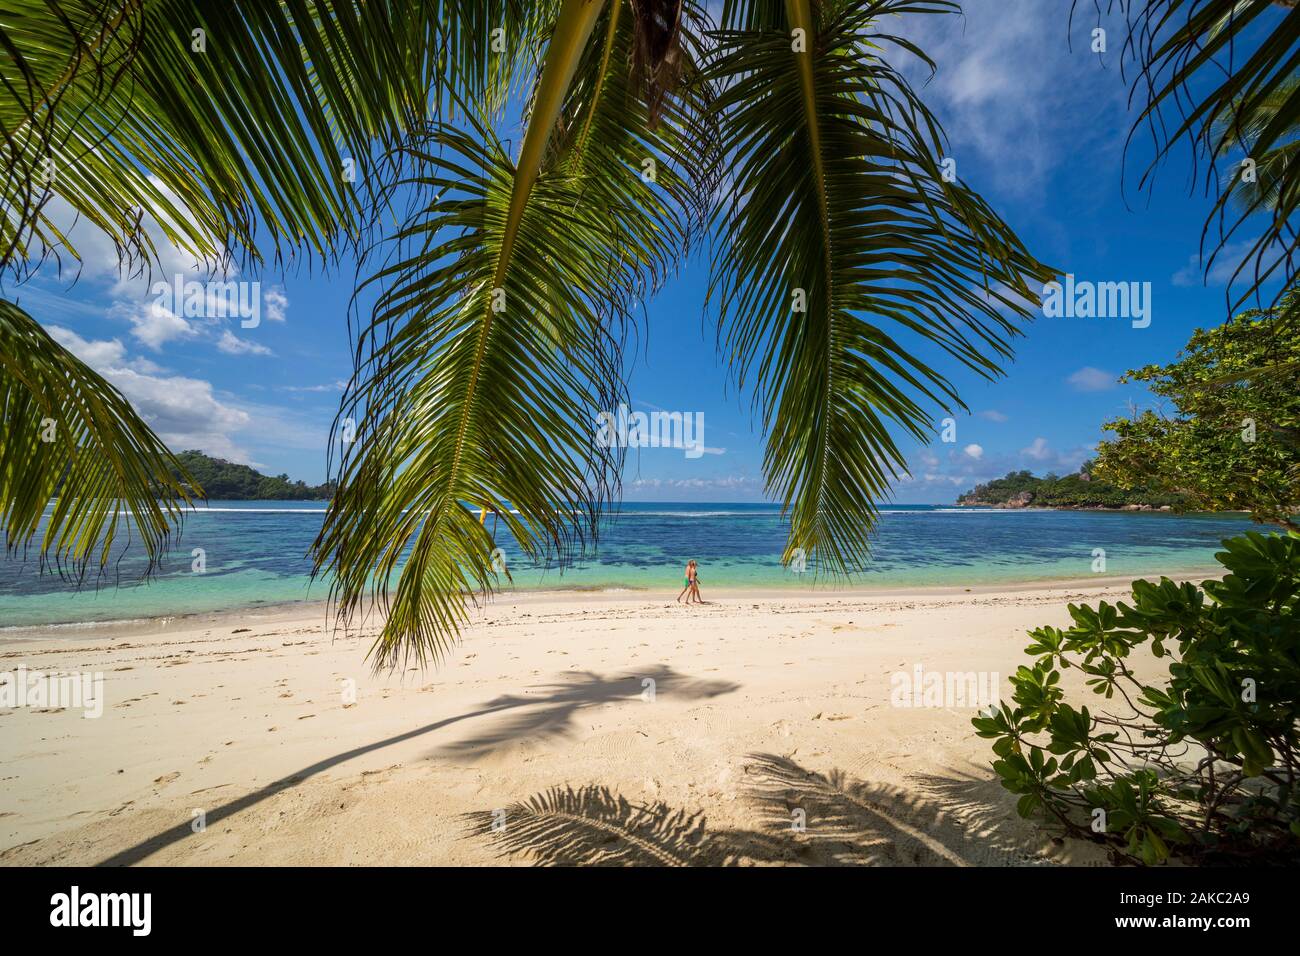 Seychelles, Mahe Island, walkers on a white sand beach lined with coconut trees in Baie Lazare Stock Photo